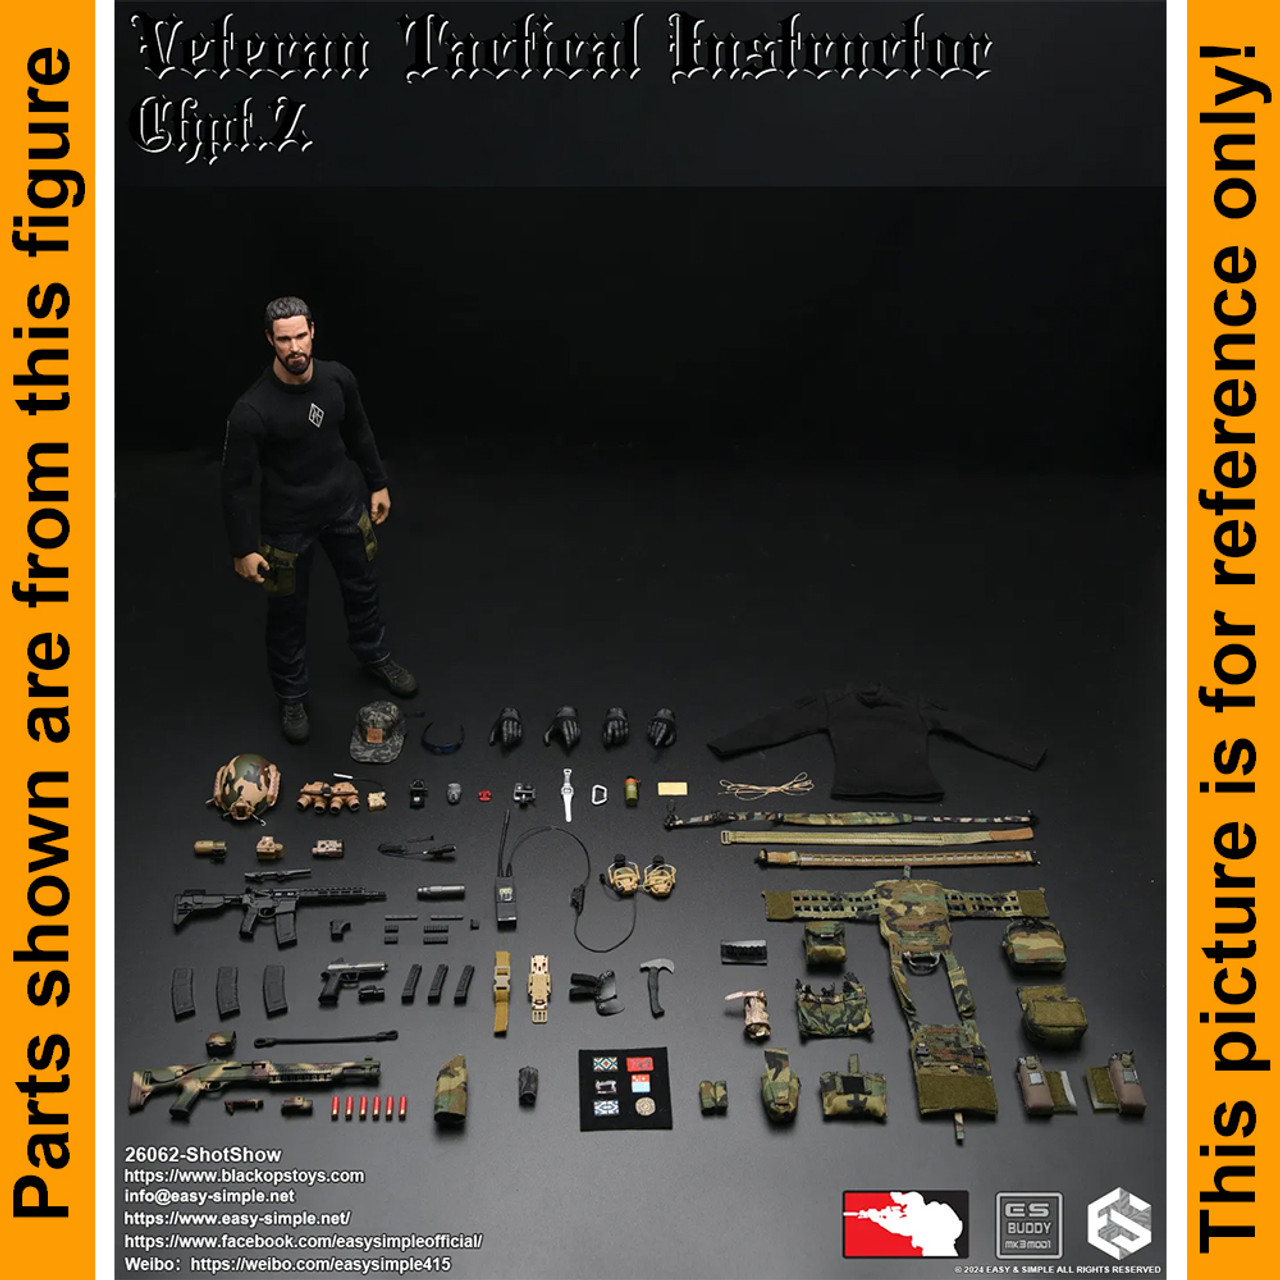 Shotshow Tactical Instructor - Sunglasses - 1/6 Scale -